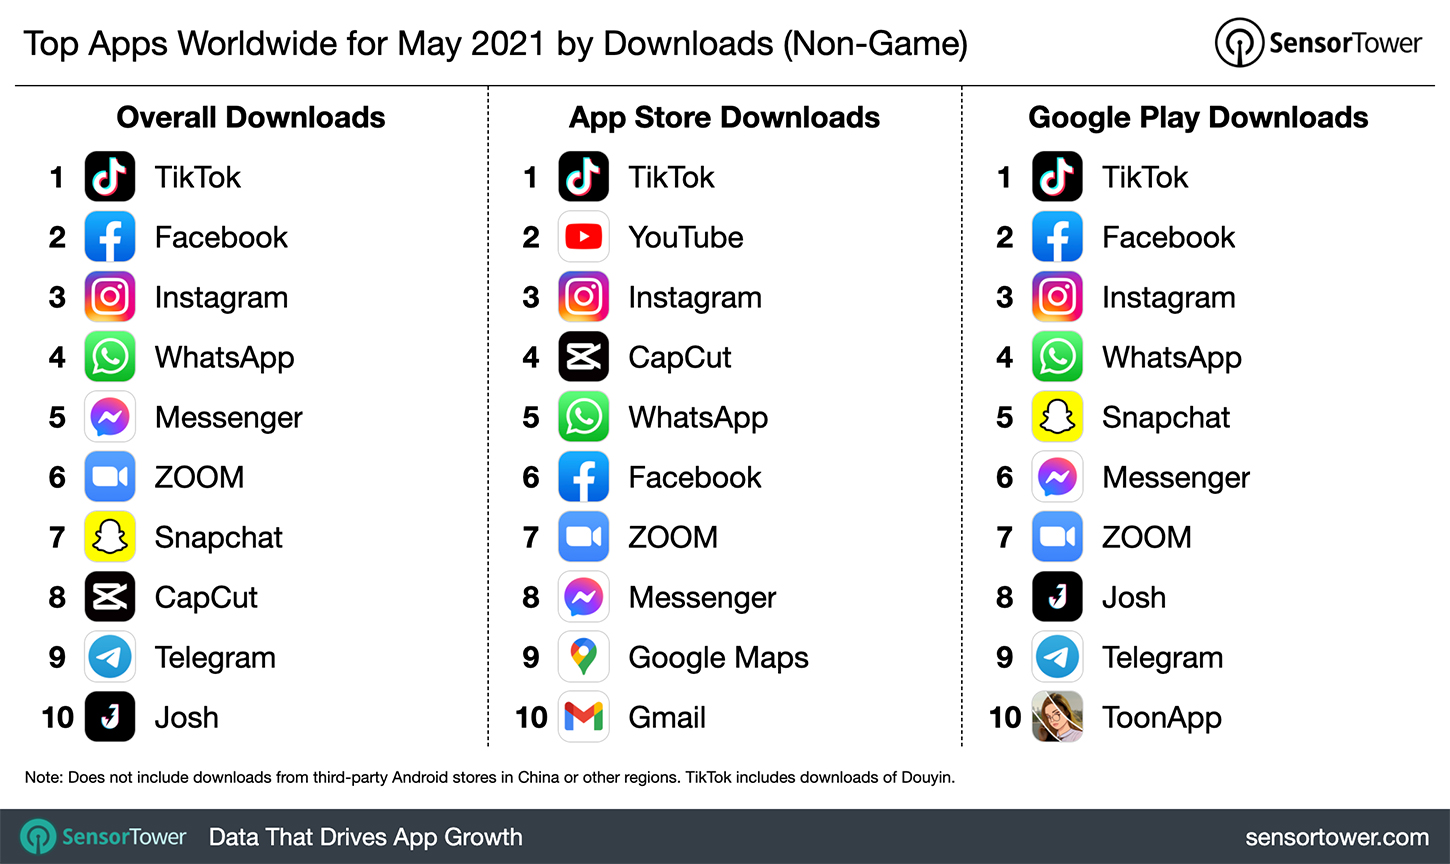 Top Apps Worldwide for May 2021 by Downloads